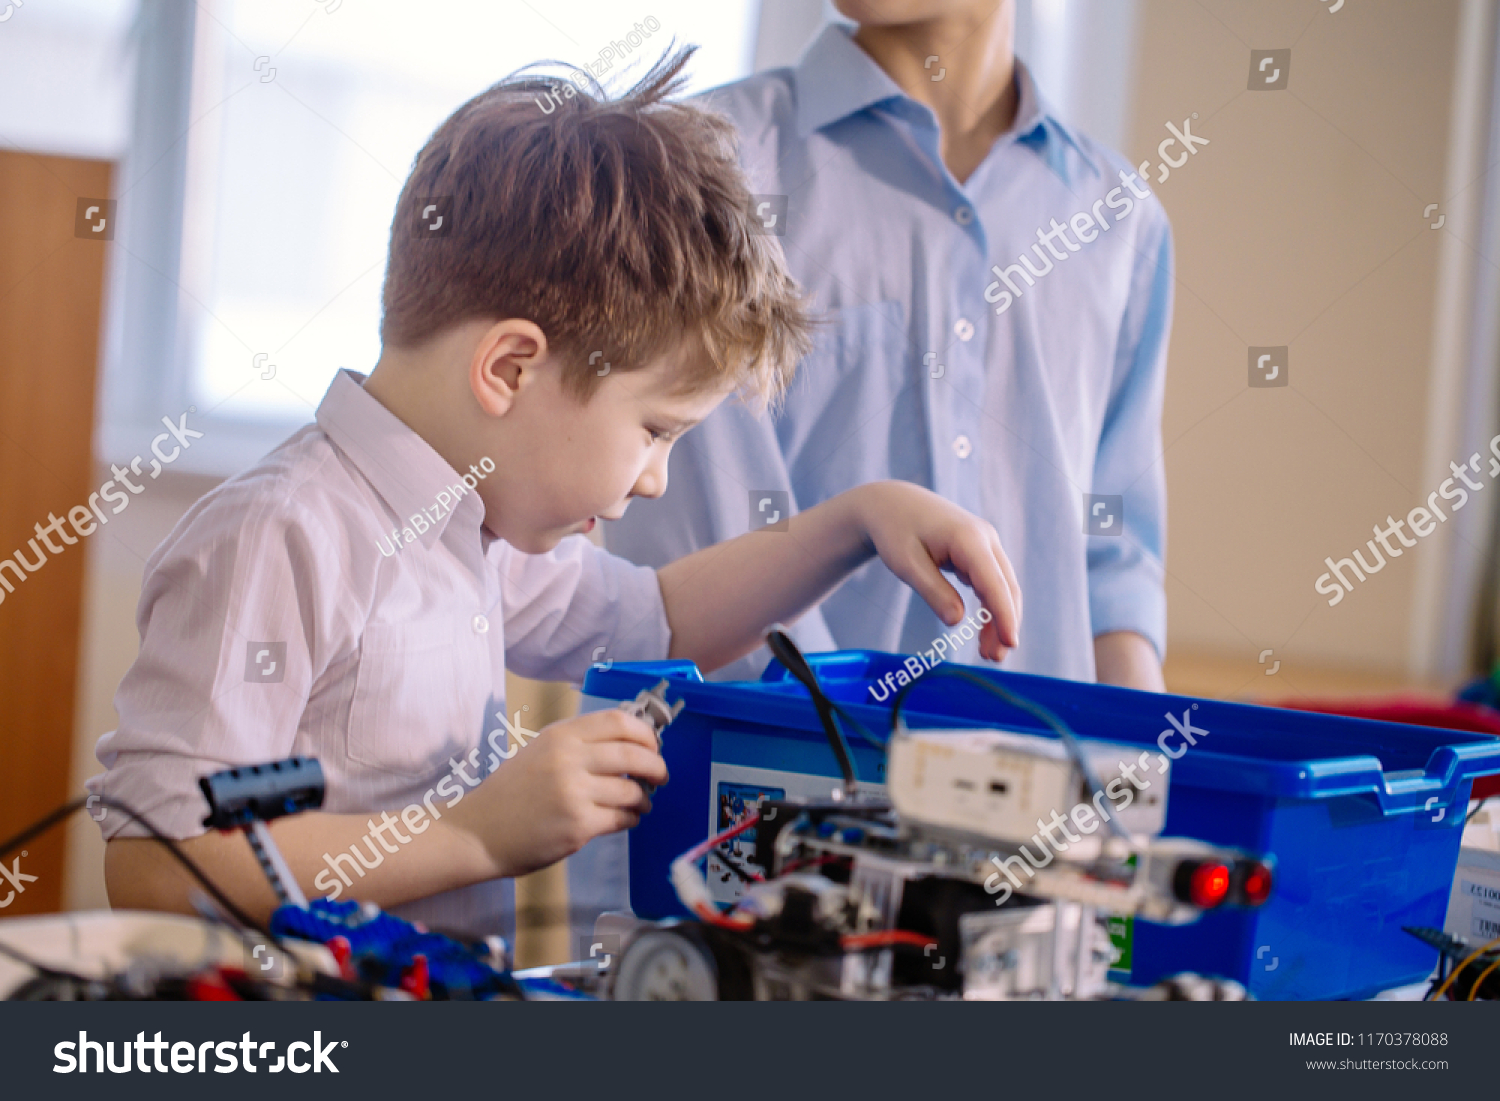 Fair haired cheerful little boy making a robot from metal parts and microcircuits, his brother helps him, close up. Happy emotion and enjoyment. #1170378088